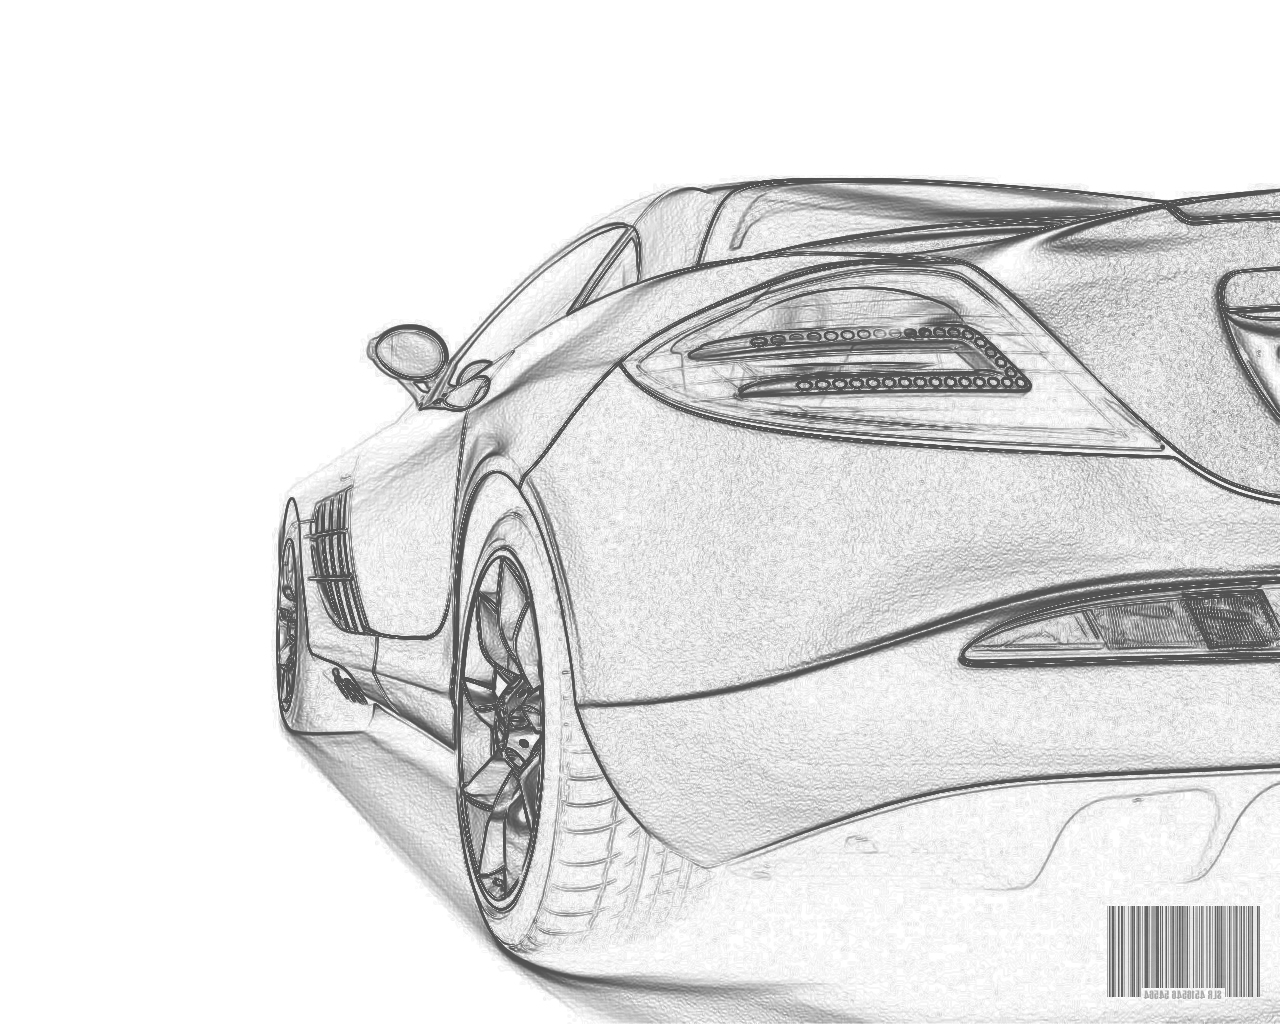 aUtOmObiLes: Car sketch,drawing and designing